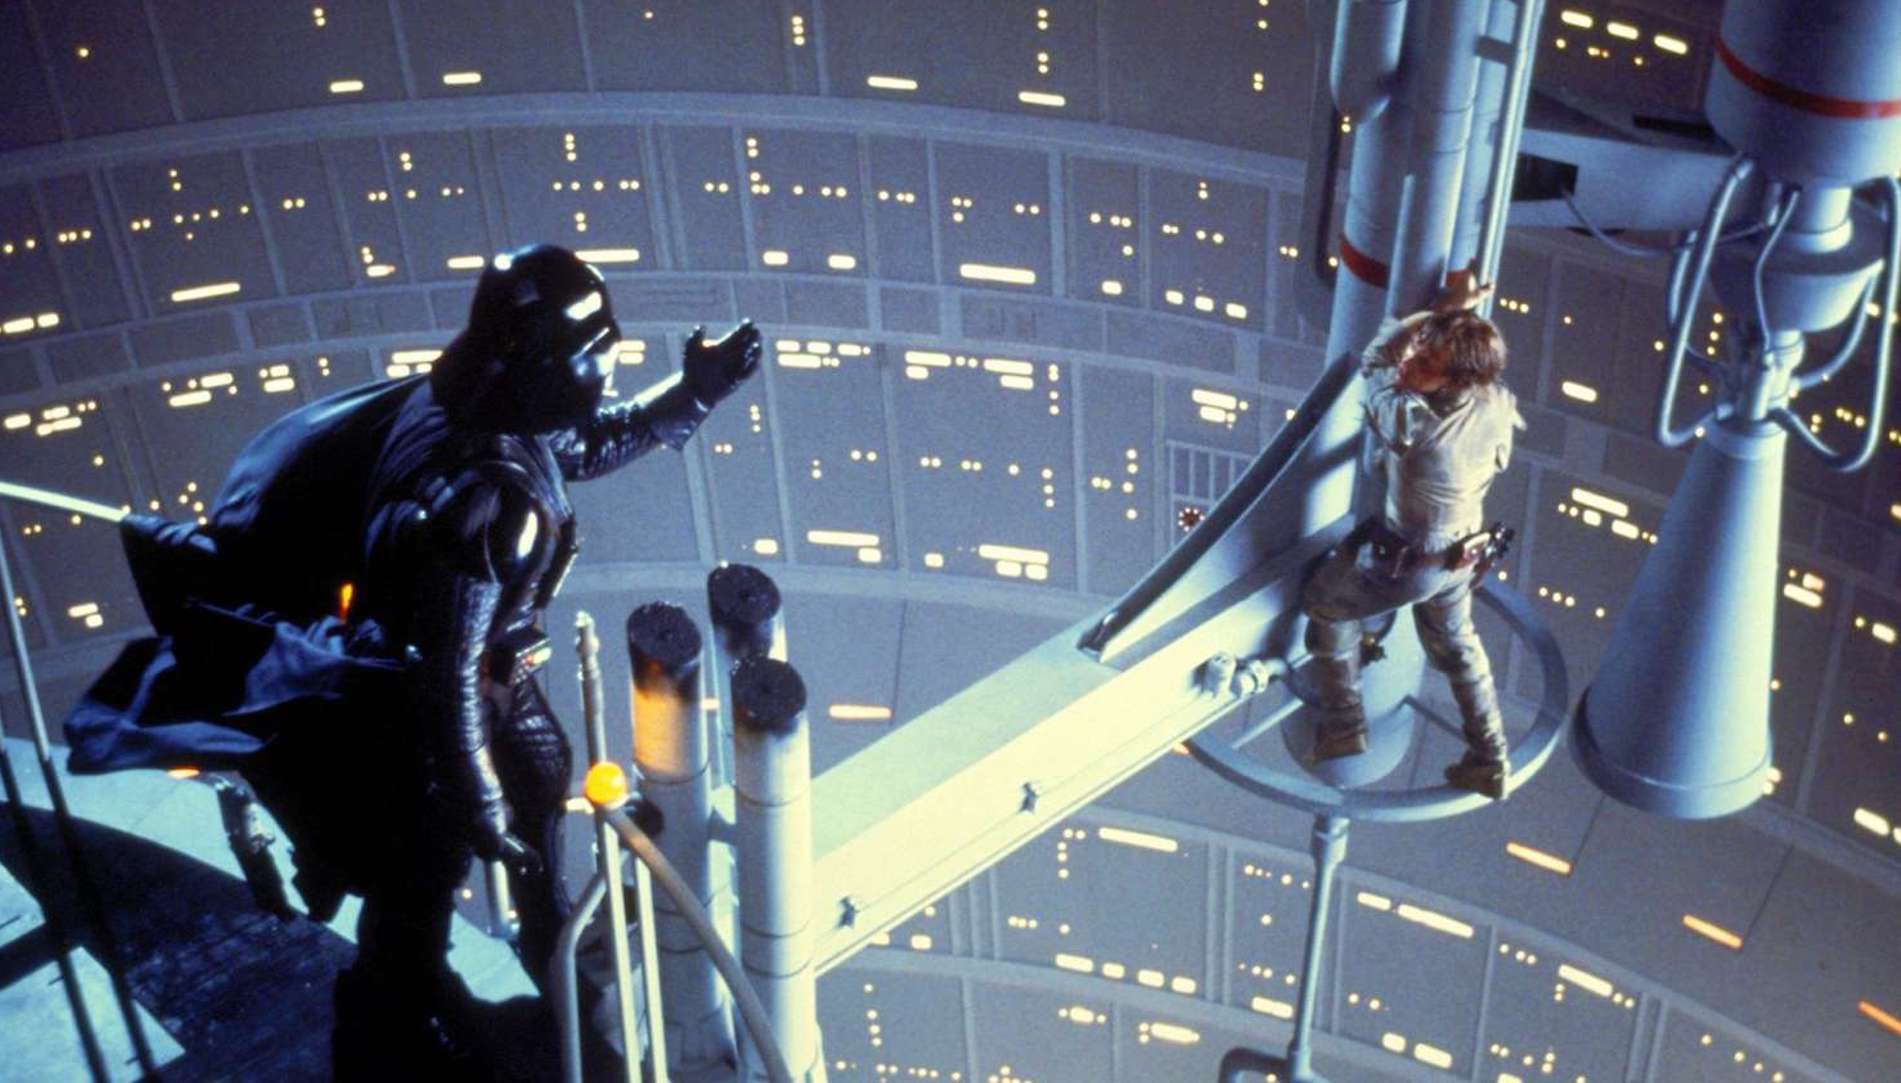 Darth Vader reaching out to Luke Skywalker (Mark Hamill) in the final battle in 'Empire Strikes Back'